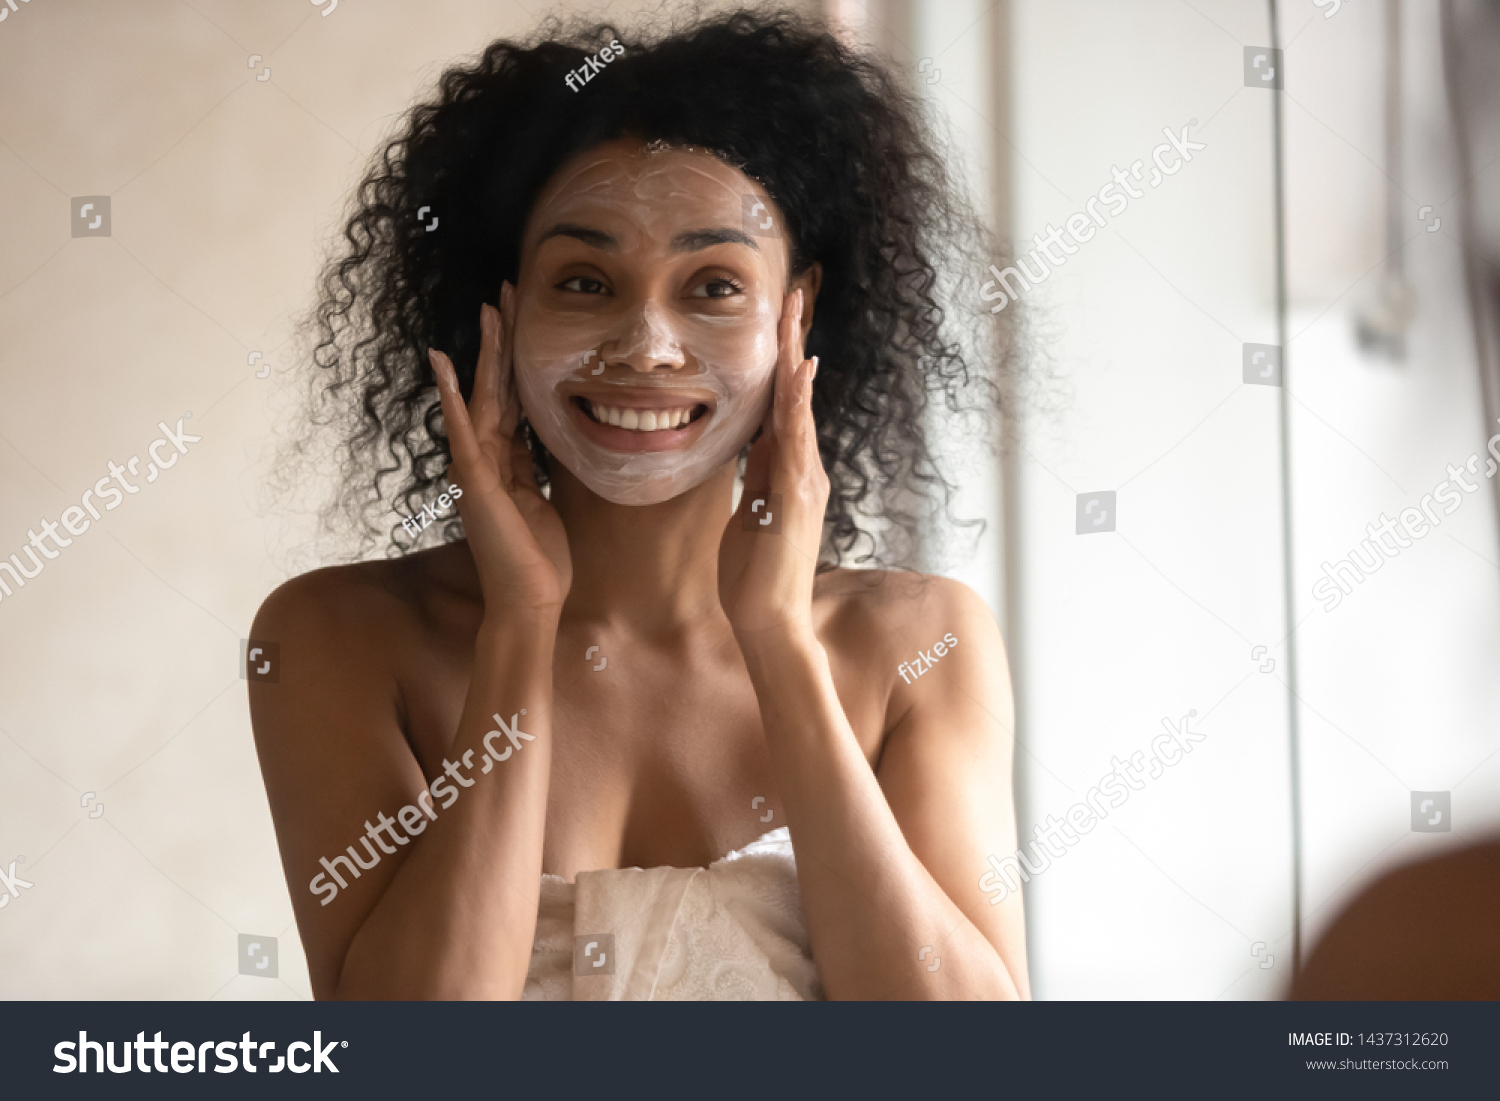 African 30s young woman after shower is wrapped in towel looking in mirror pampering herself applying face mask use anti-aging beauty product feeling happy, skin care, everyday morning routine concept #1437312620